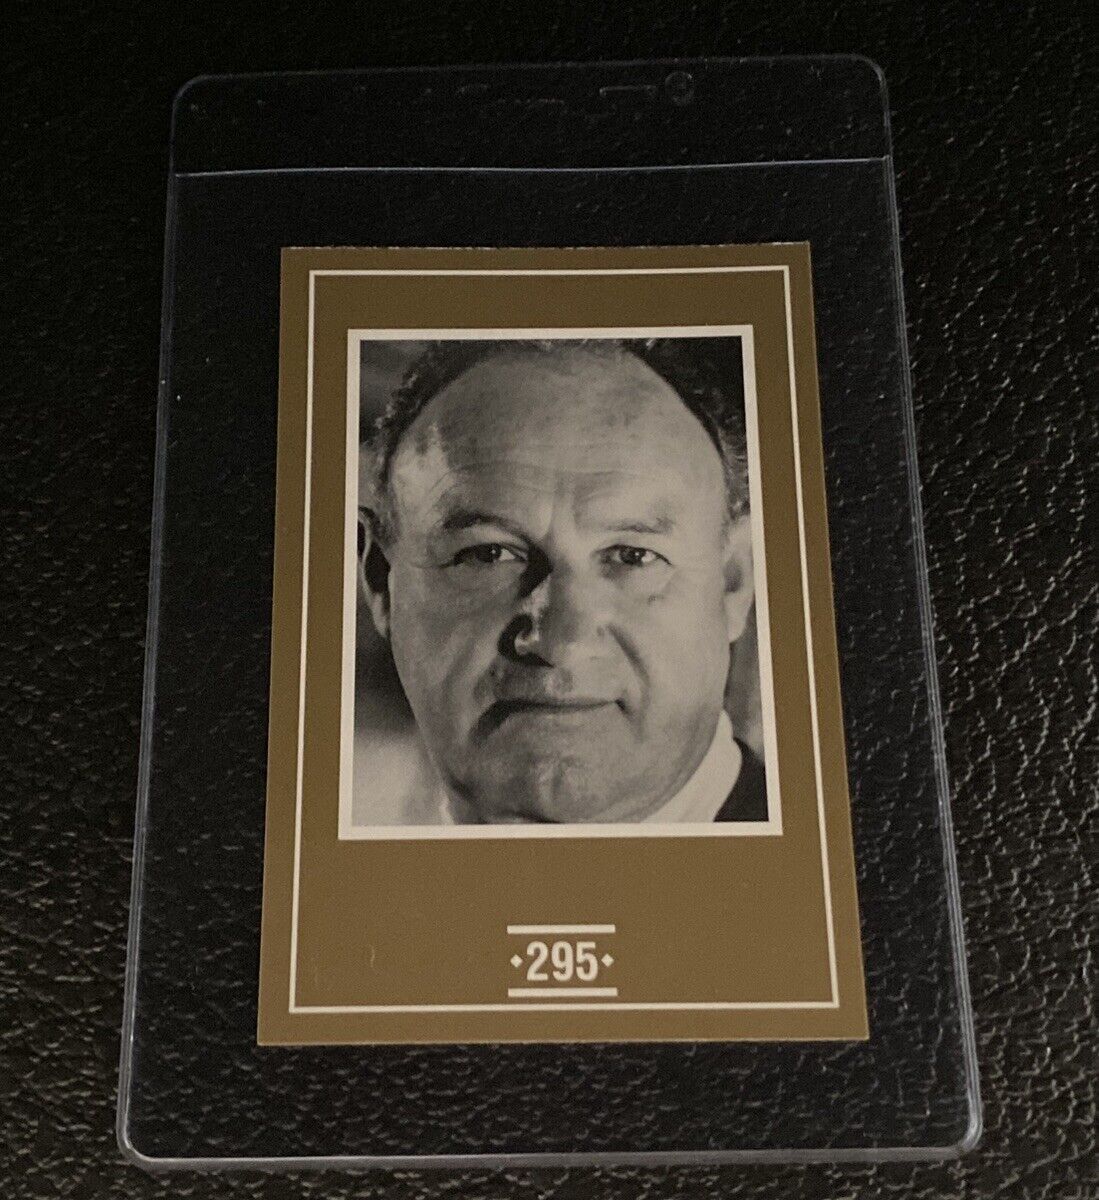 Gene Hackman Card 1991 Face To Face Guessing Game Canada Games Lex Luthor Actor